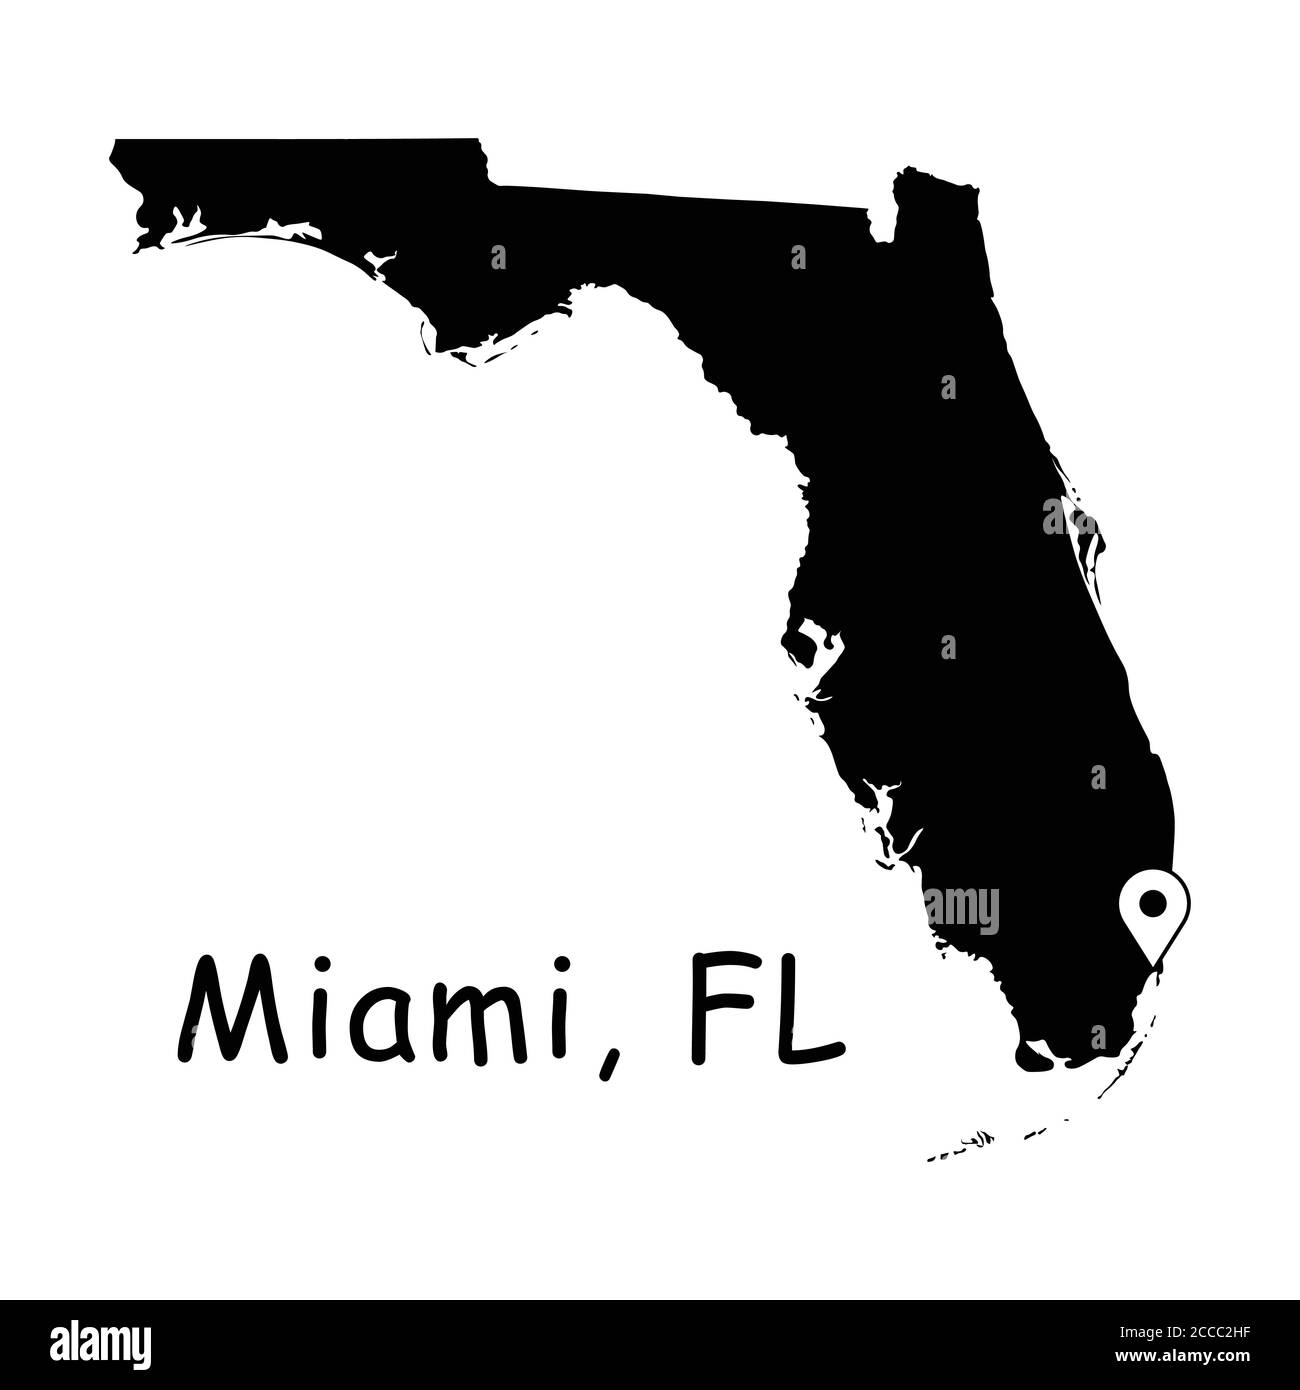 Miami on Florida State Map. Detailed FL State Map with Location Pin on Miami City. Black silhouette vector map isolated on white background. Stock Vector